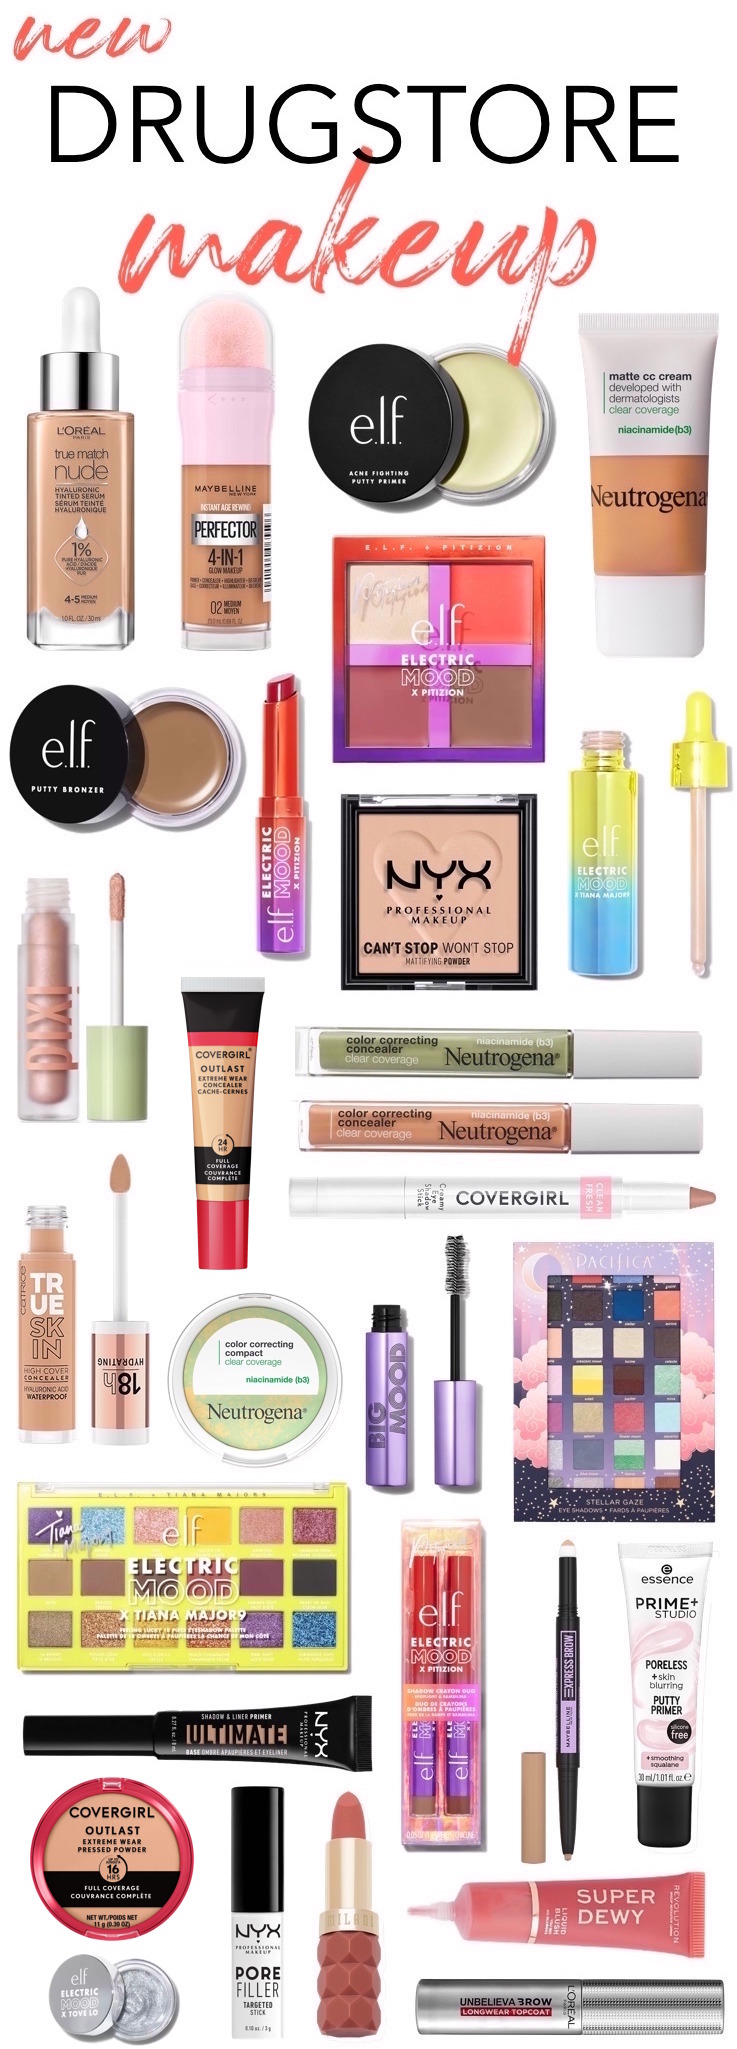 27 New Drugstore Makeup Launches For Summer 2021